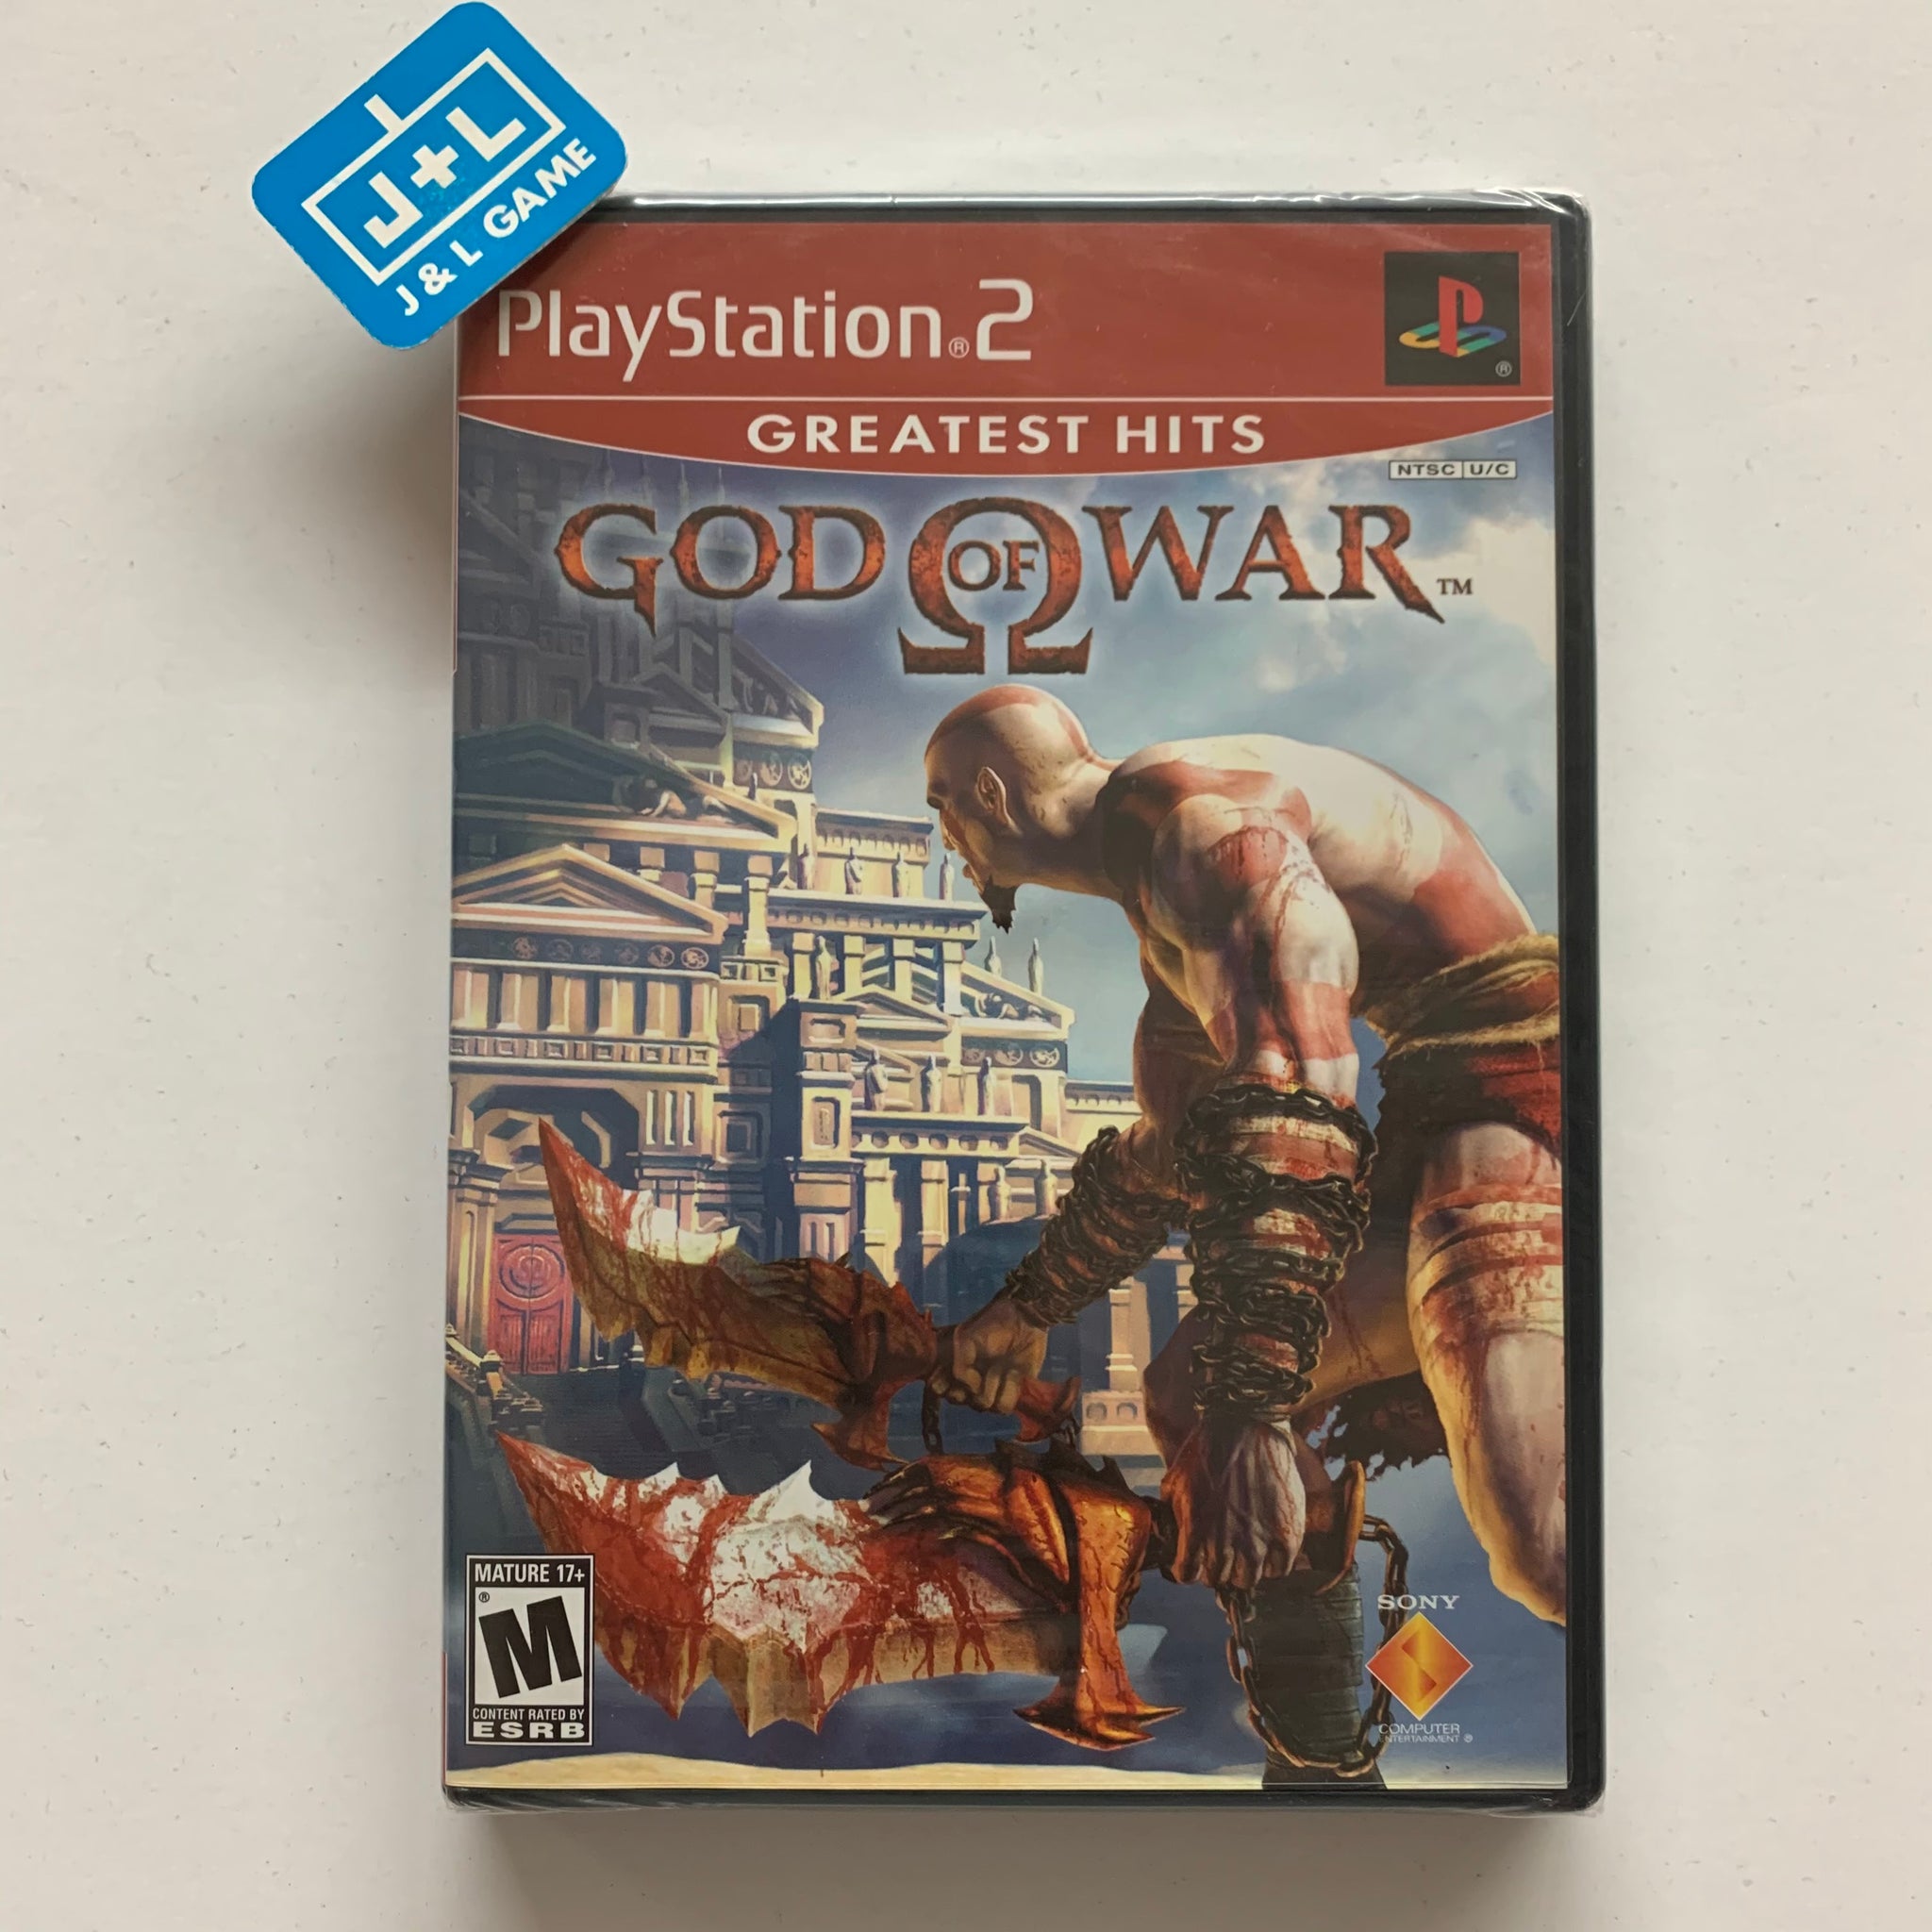 GOD OF WAR GAMES, VARIOUS PRICES PLAYSTATION, PS2, PSP